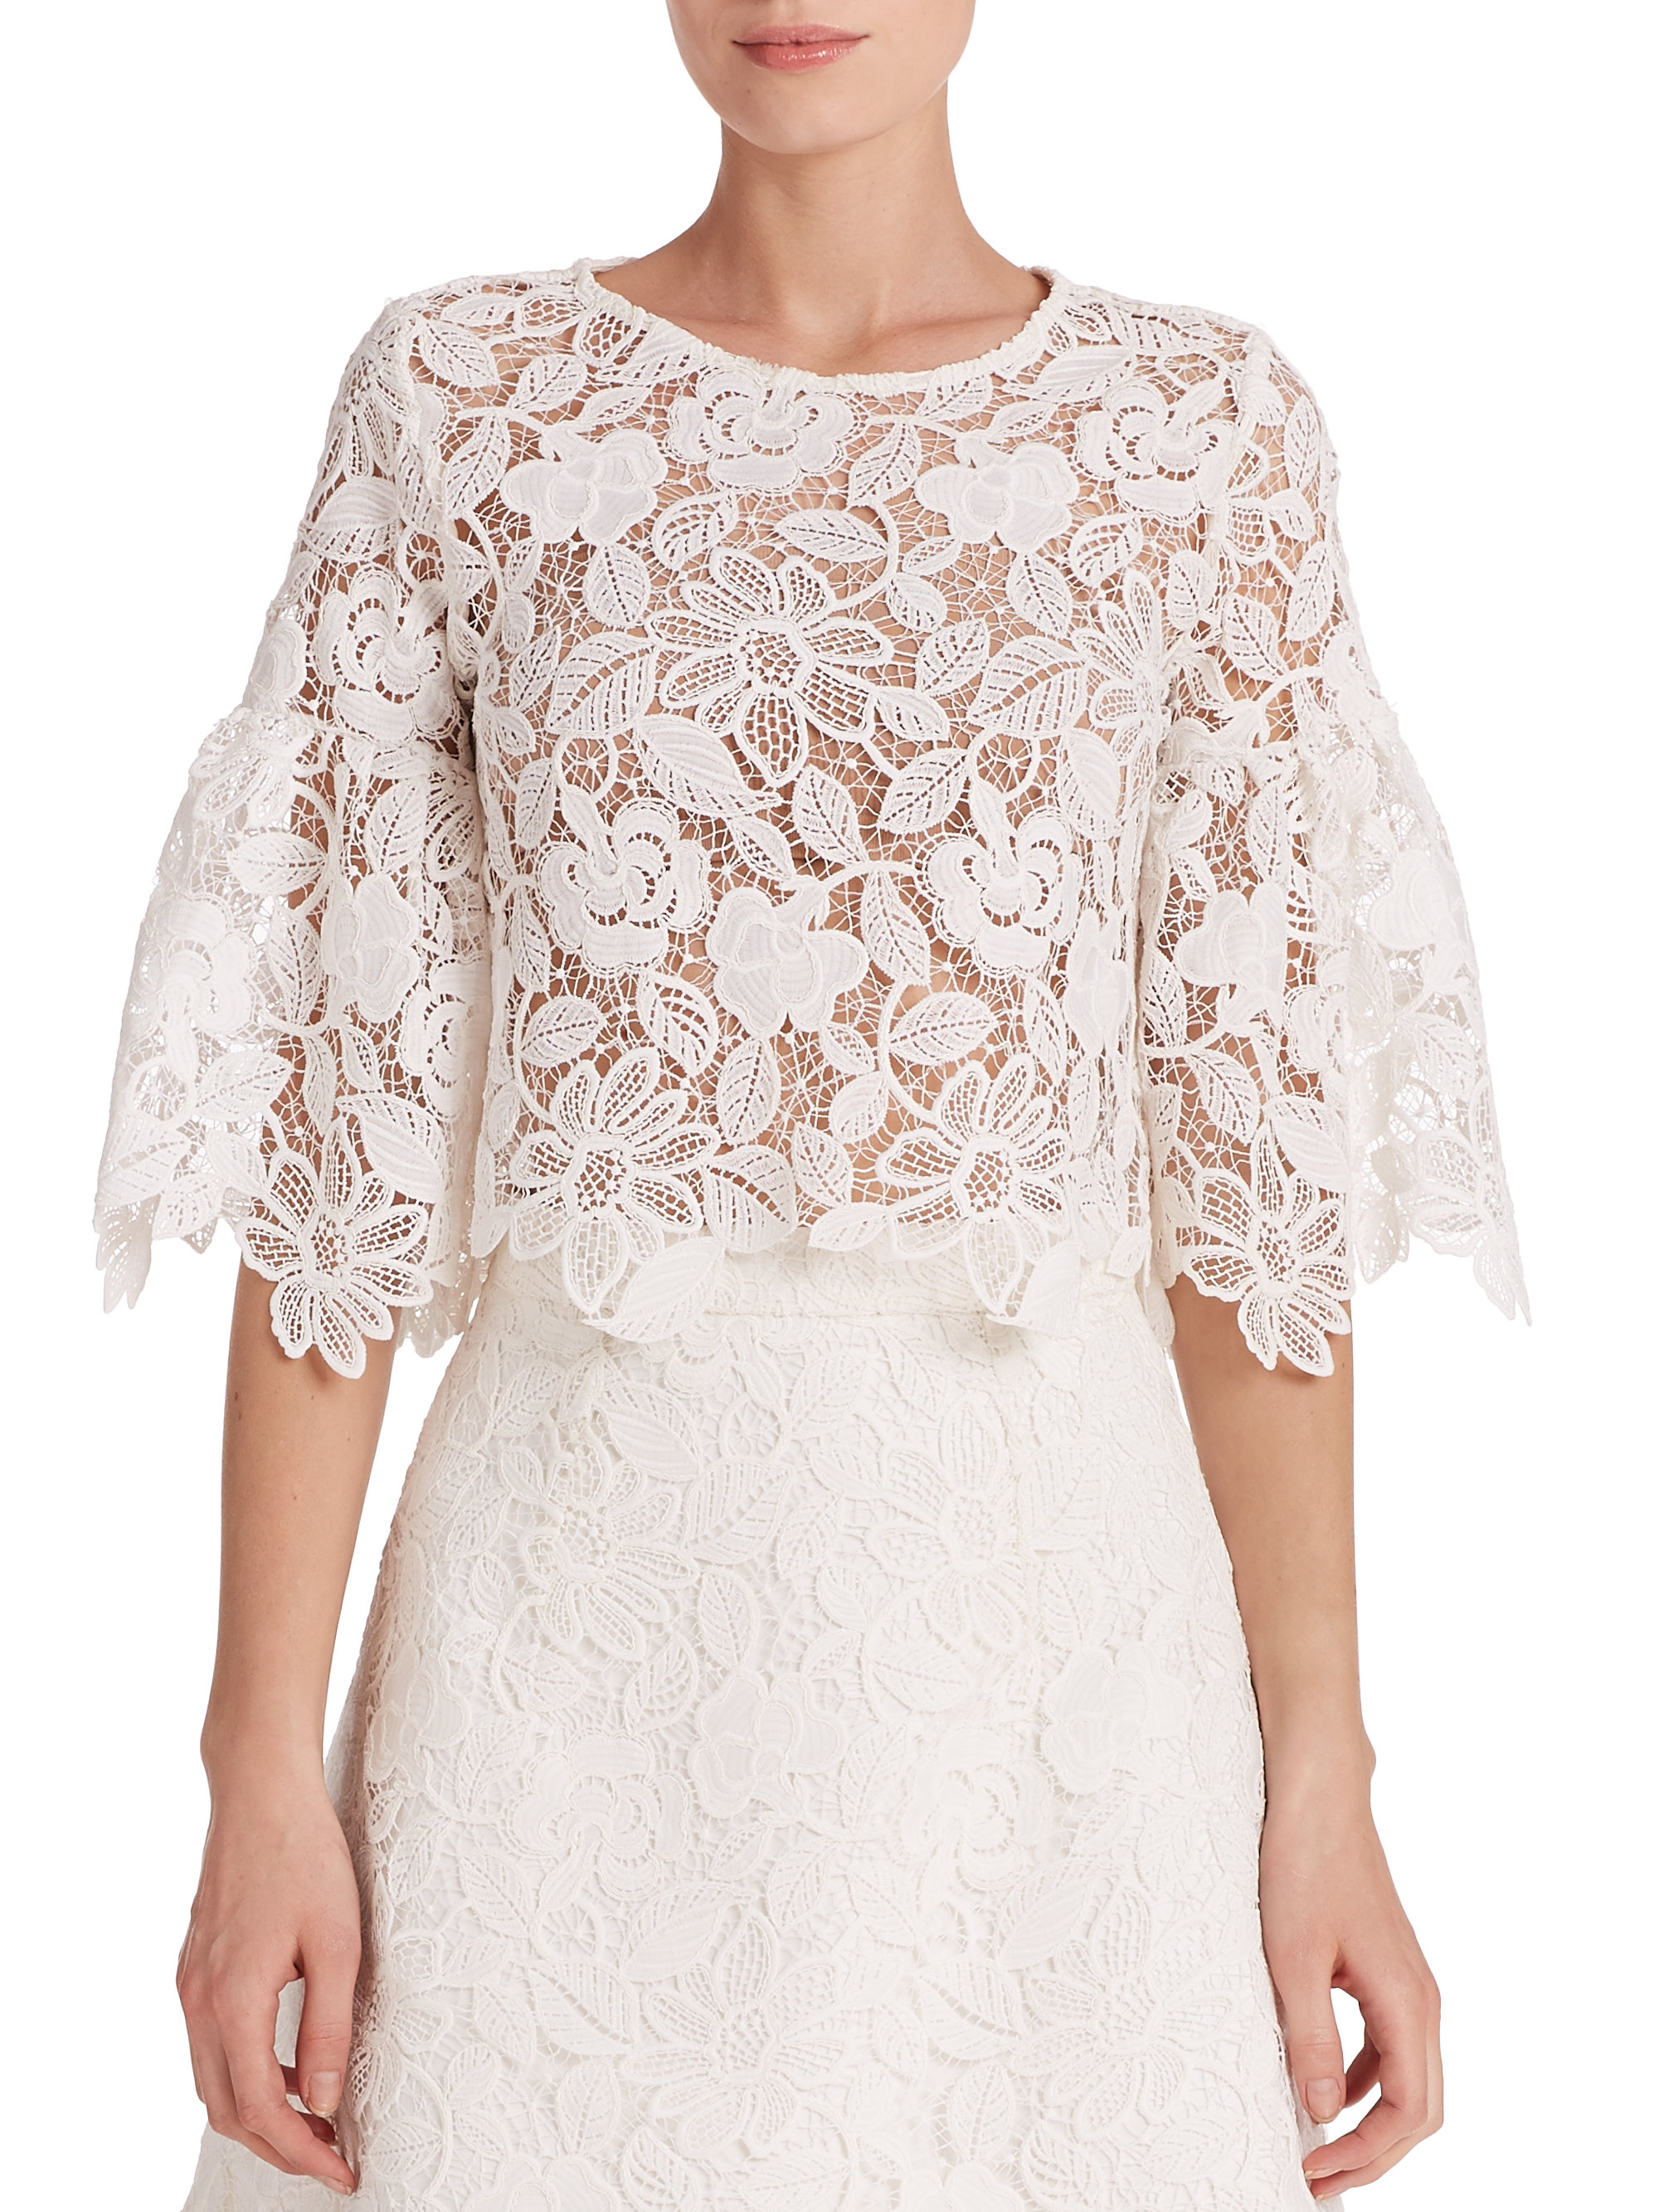 Alexis Valery Lace Bell-Sleeve Cropped Top in White Lace (White) - Lyst